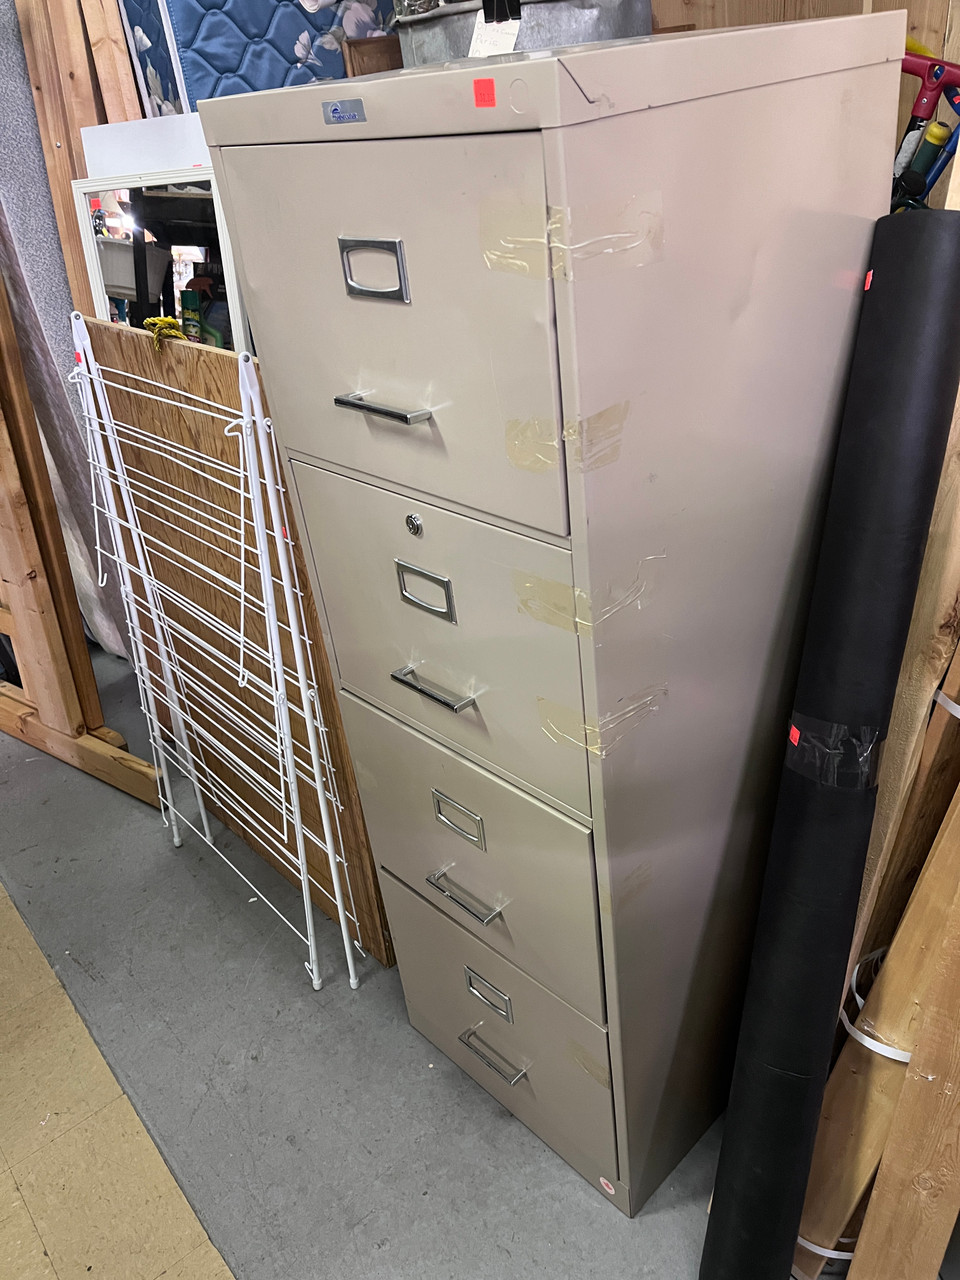 Metal Filing Cabinet with 4 Drawers